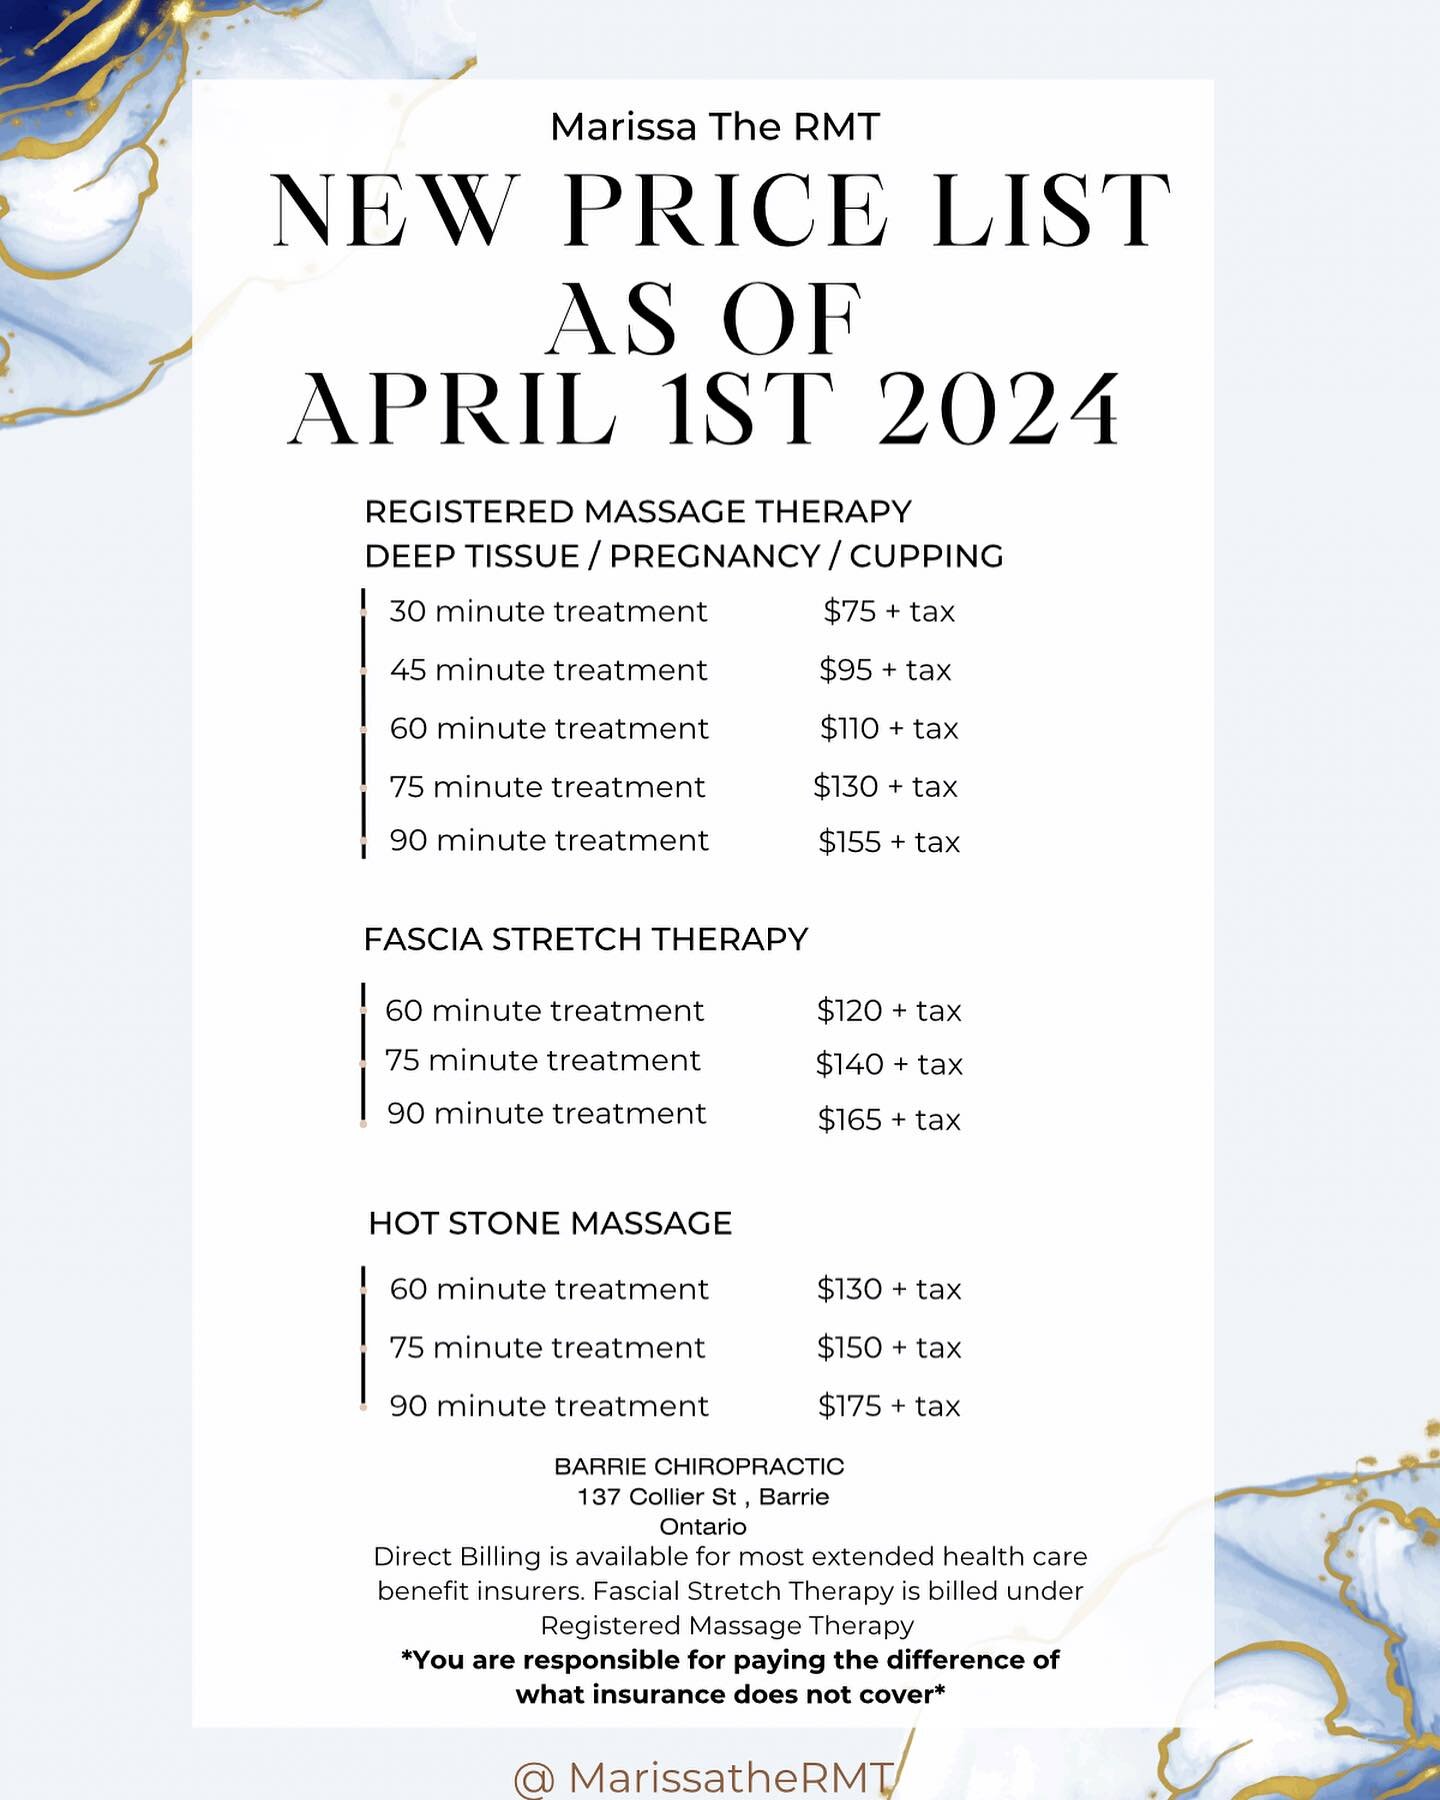 🌿 Attention valued clients! 🌿

📢 There will be a small fee increase📢

Effective April 1st, 2024, there will be a modest adjustment to my massage therapy rates. In order to continue providing top-notch service and investing in ongoing training and